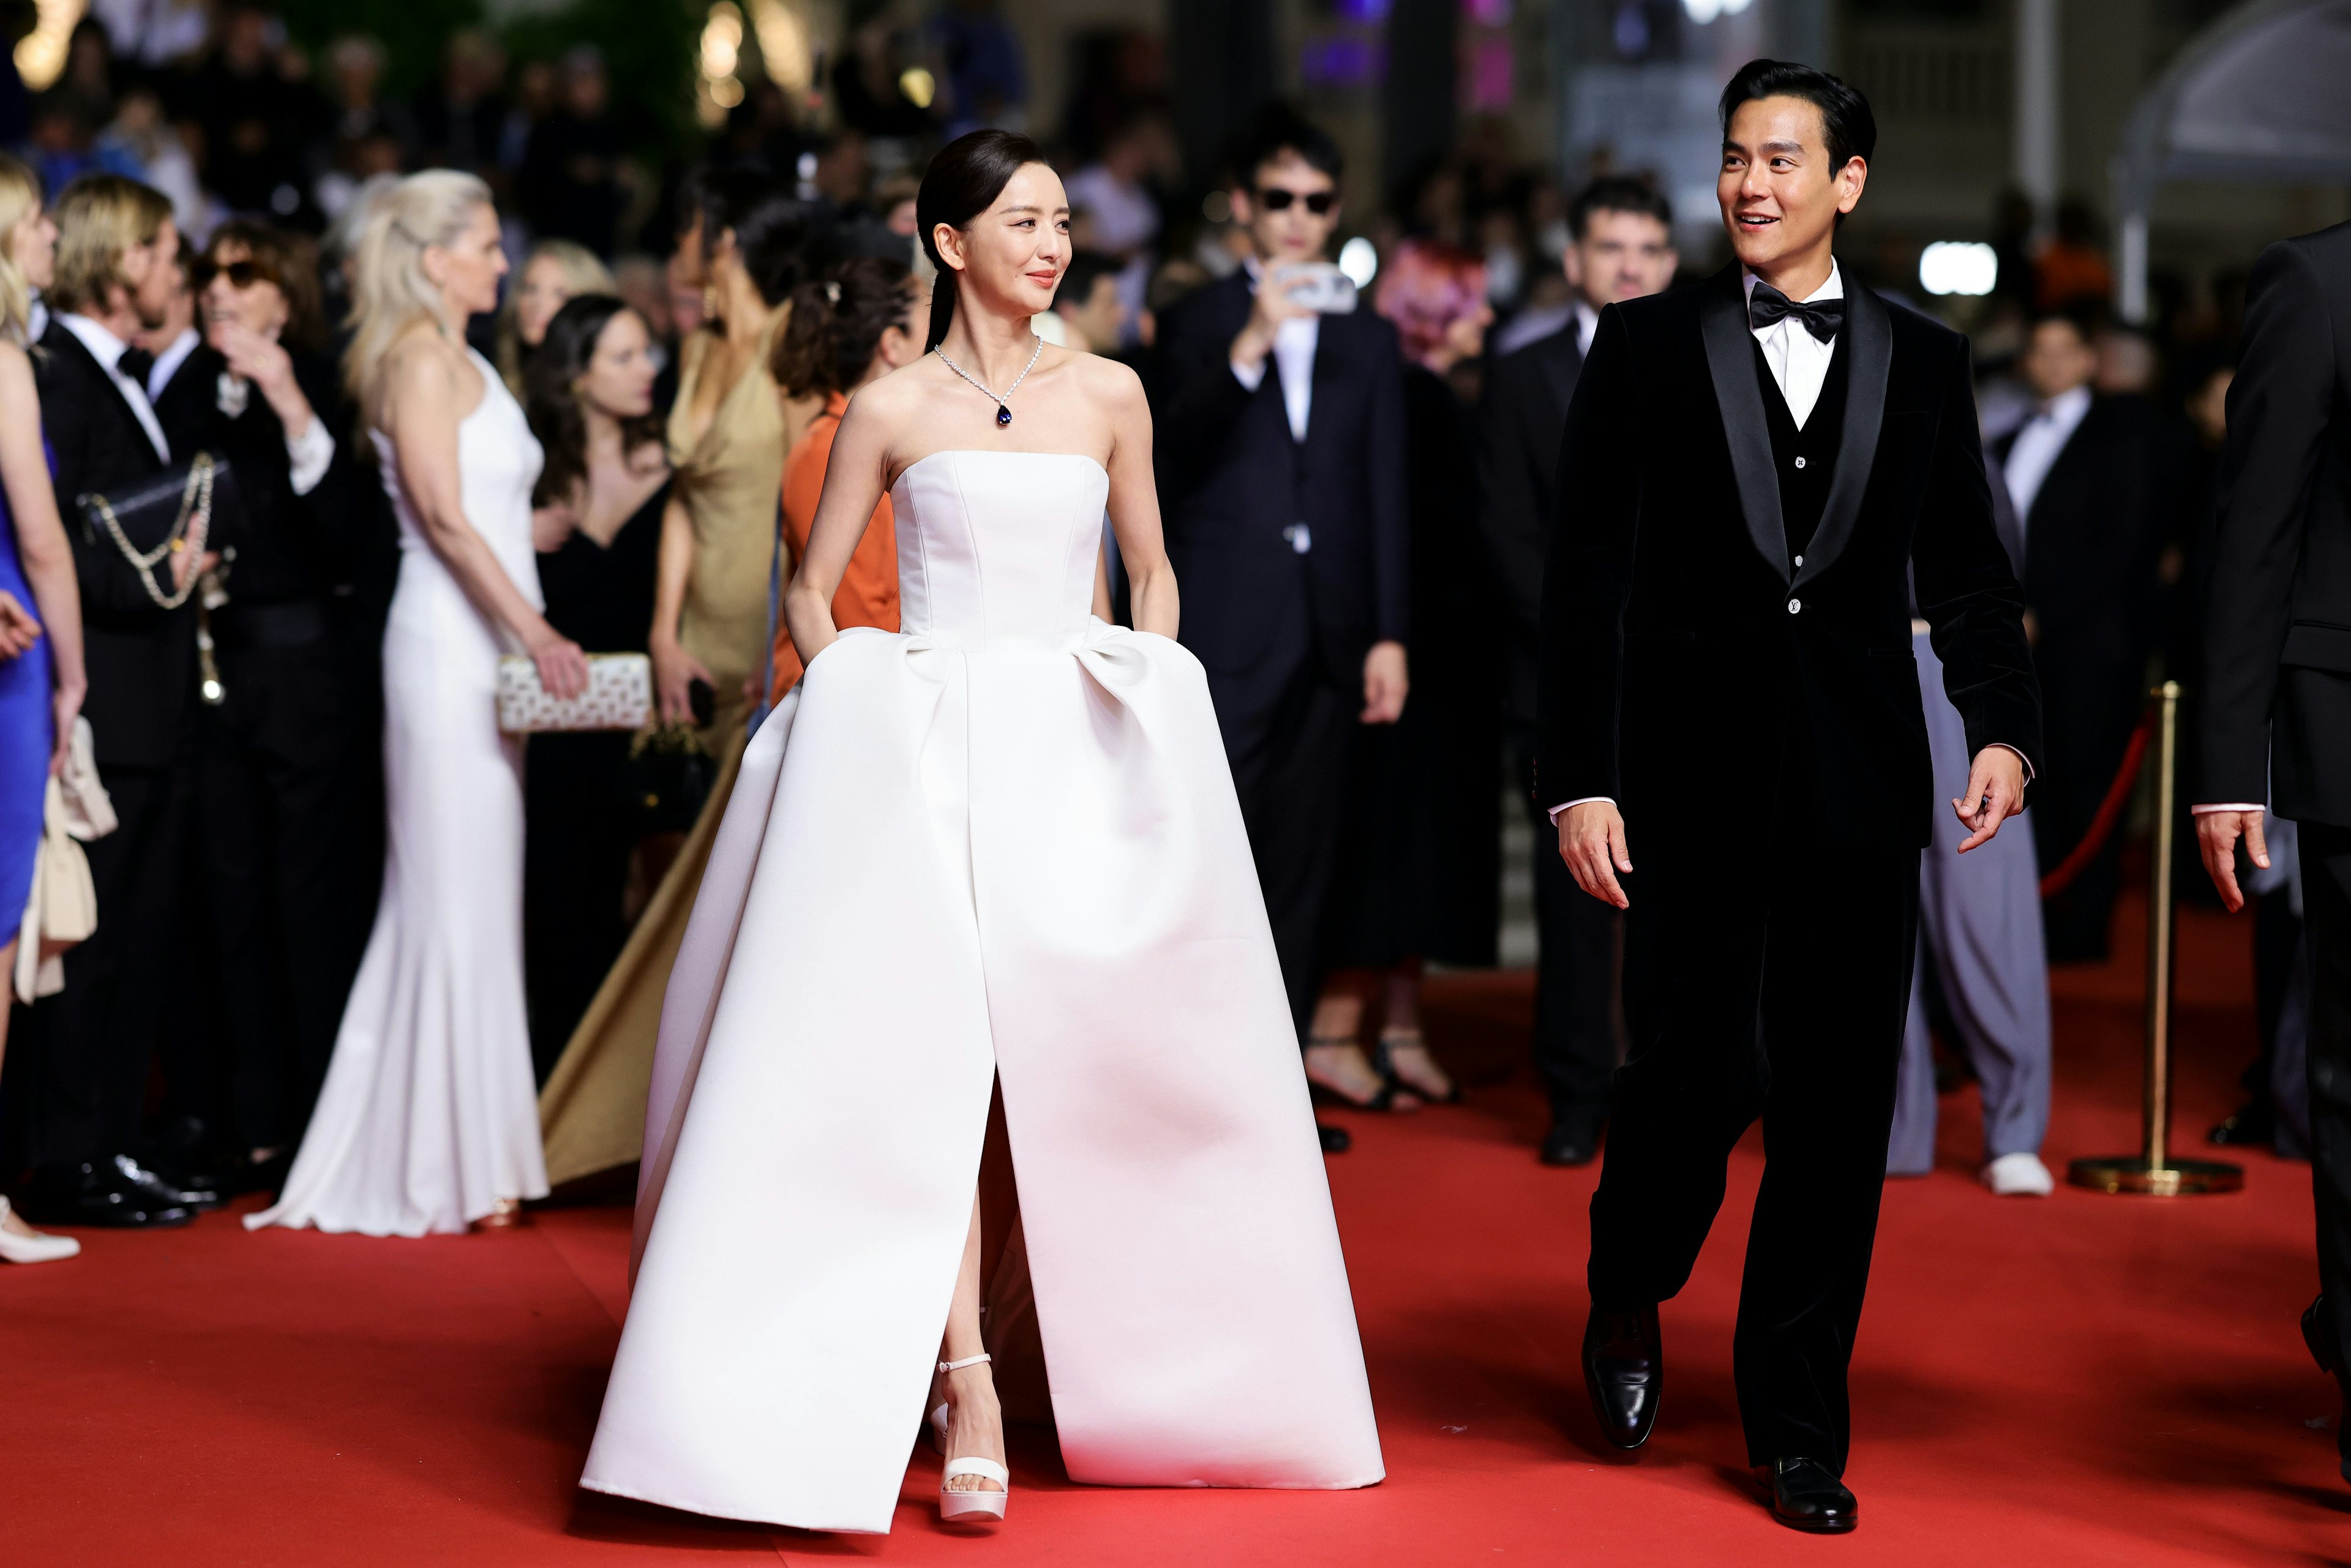 Louis Vuitton dressed star duo Eddie Peng and Tong Liya for the event. Image: Getty Images